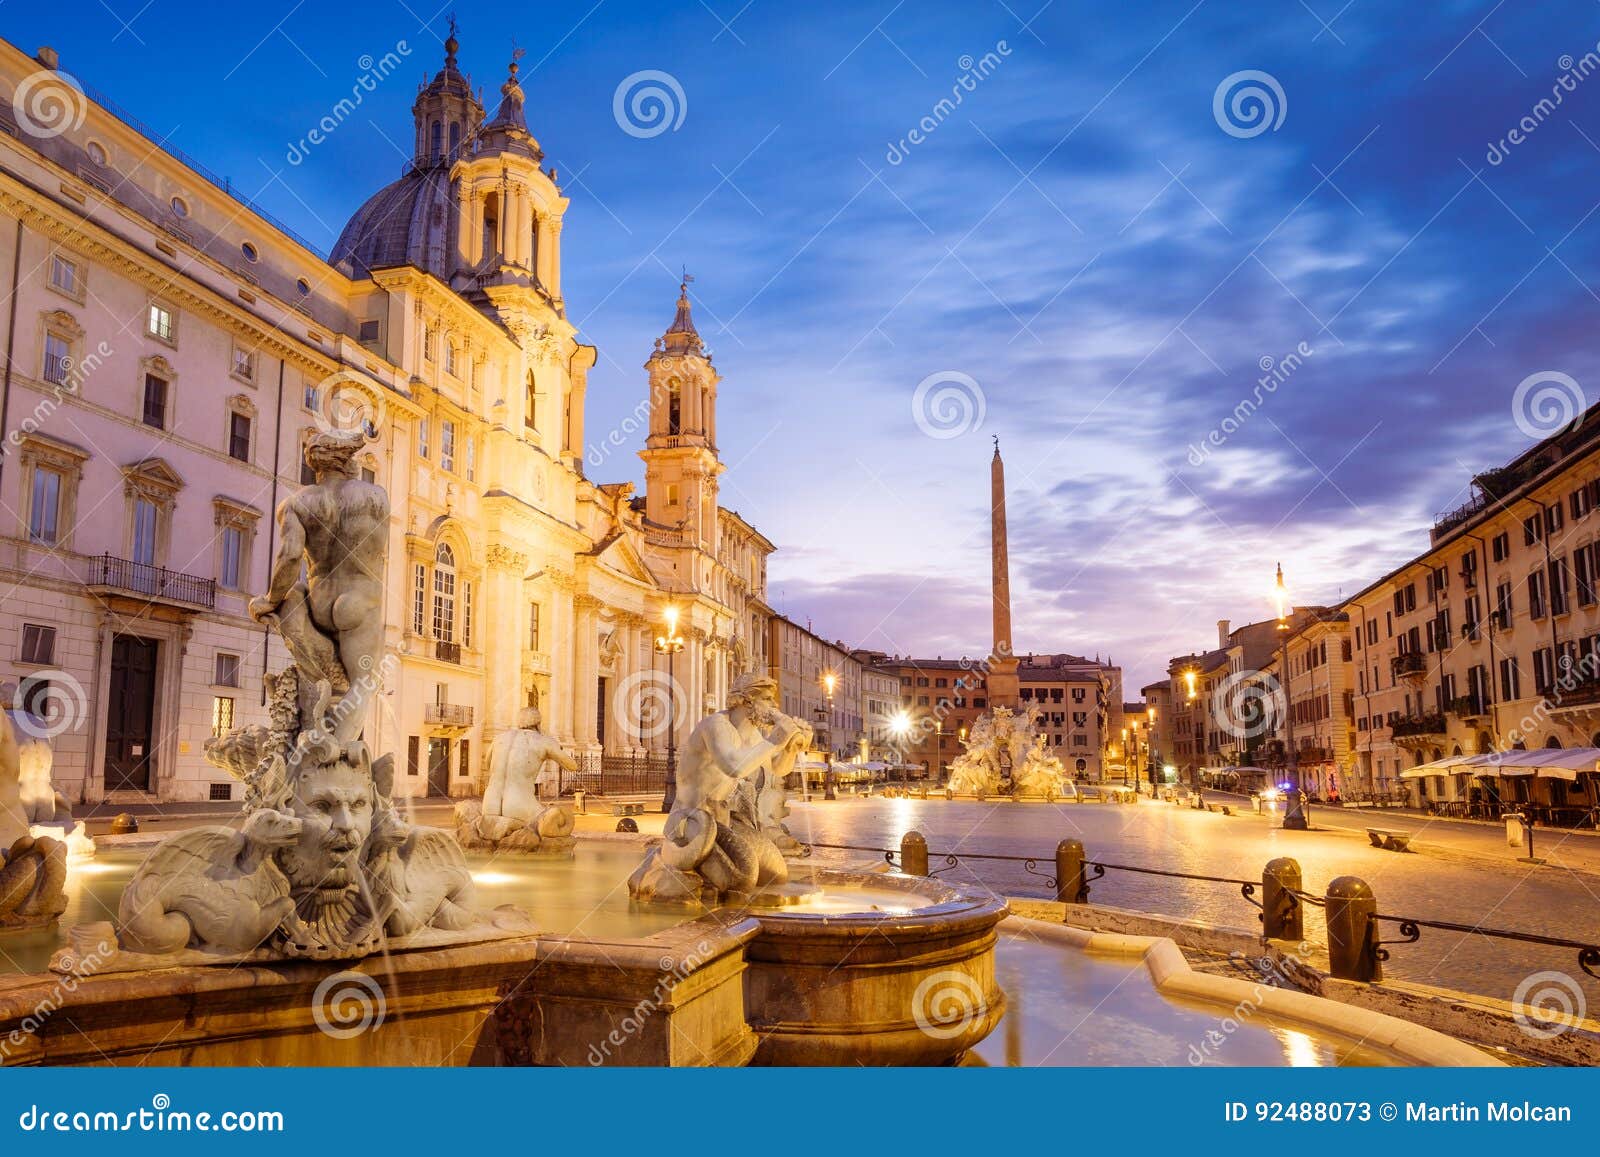 Scenic View of Piazza Navona in Rome before Sunrise Stock Image - Image ...